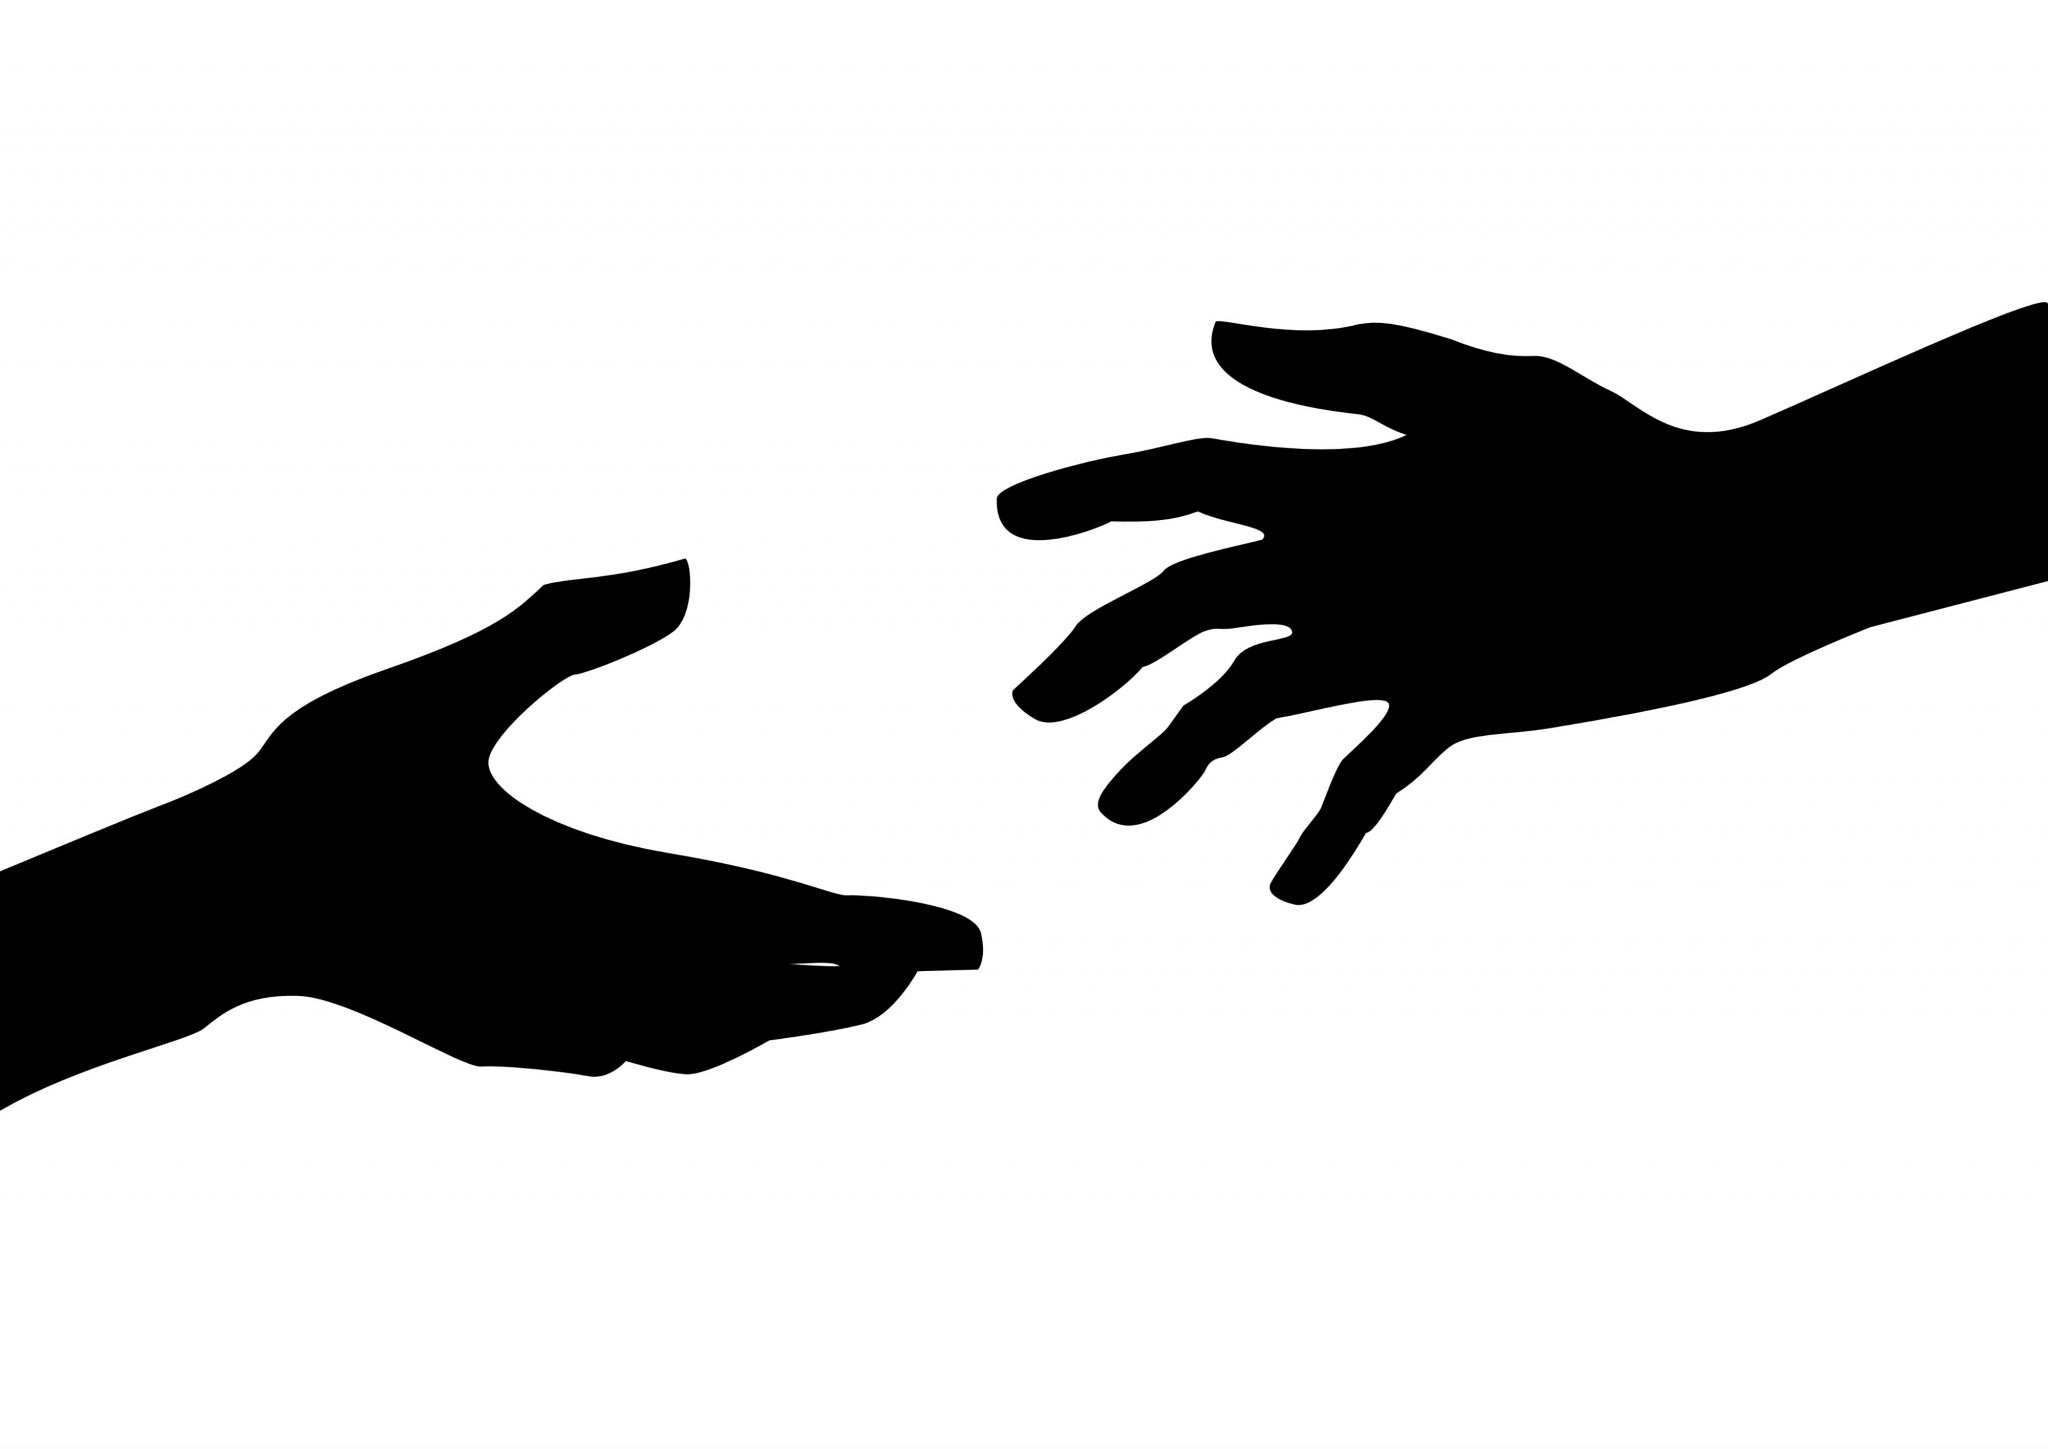 Hands maids care cic. Hand clipart helping hand